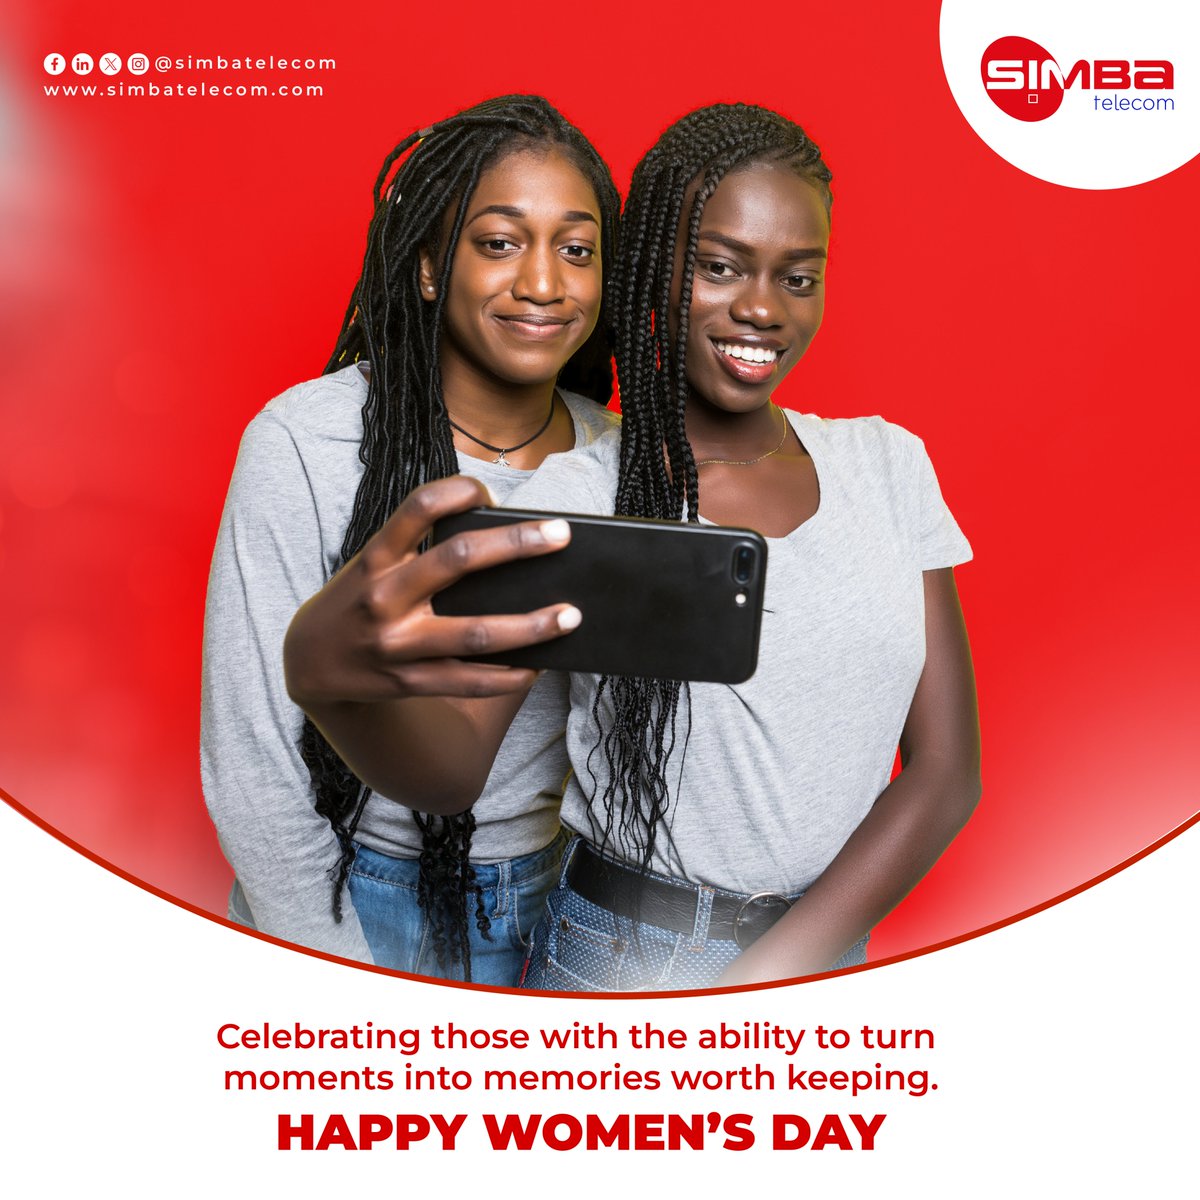 Today we celebrate those with the amazing ability to look at individual moments and through a camera turn those moments into memories worth keeping.

#HappyWomensDay